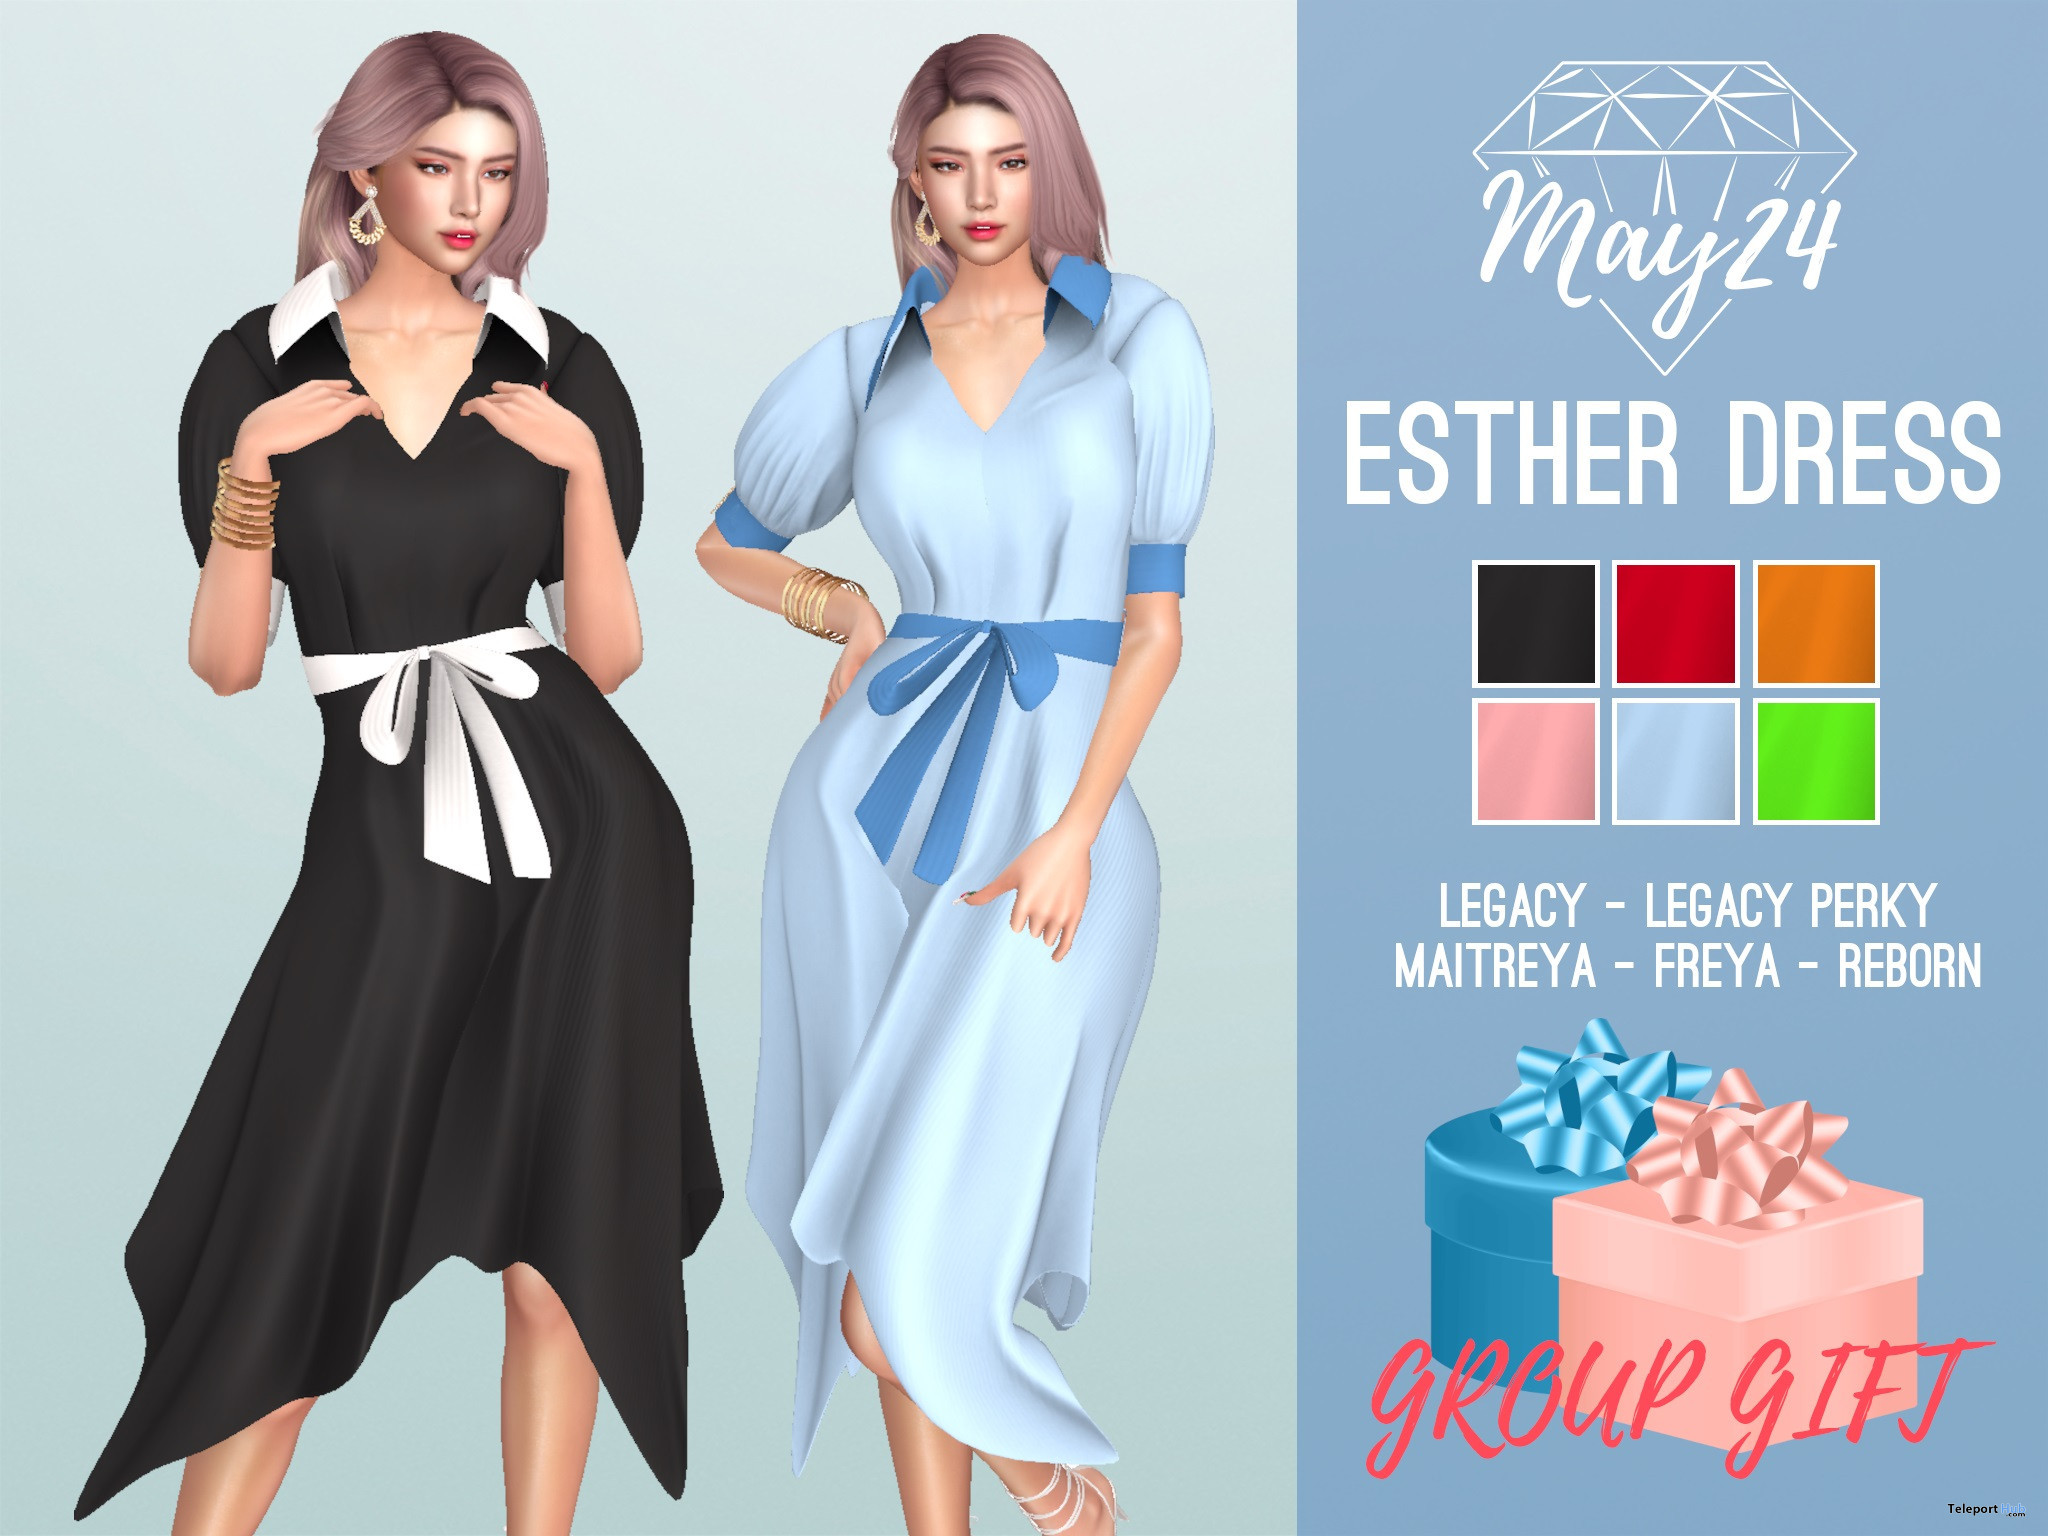 Esther Dress Fatpack August 2022 Group Gift by May24 - Teleport Hub - teleporthub.com